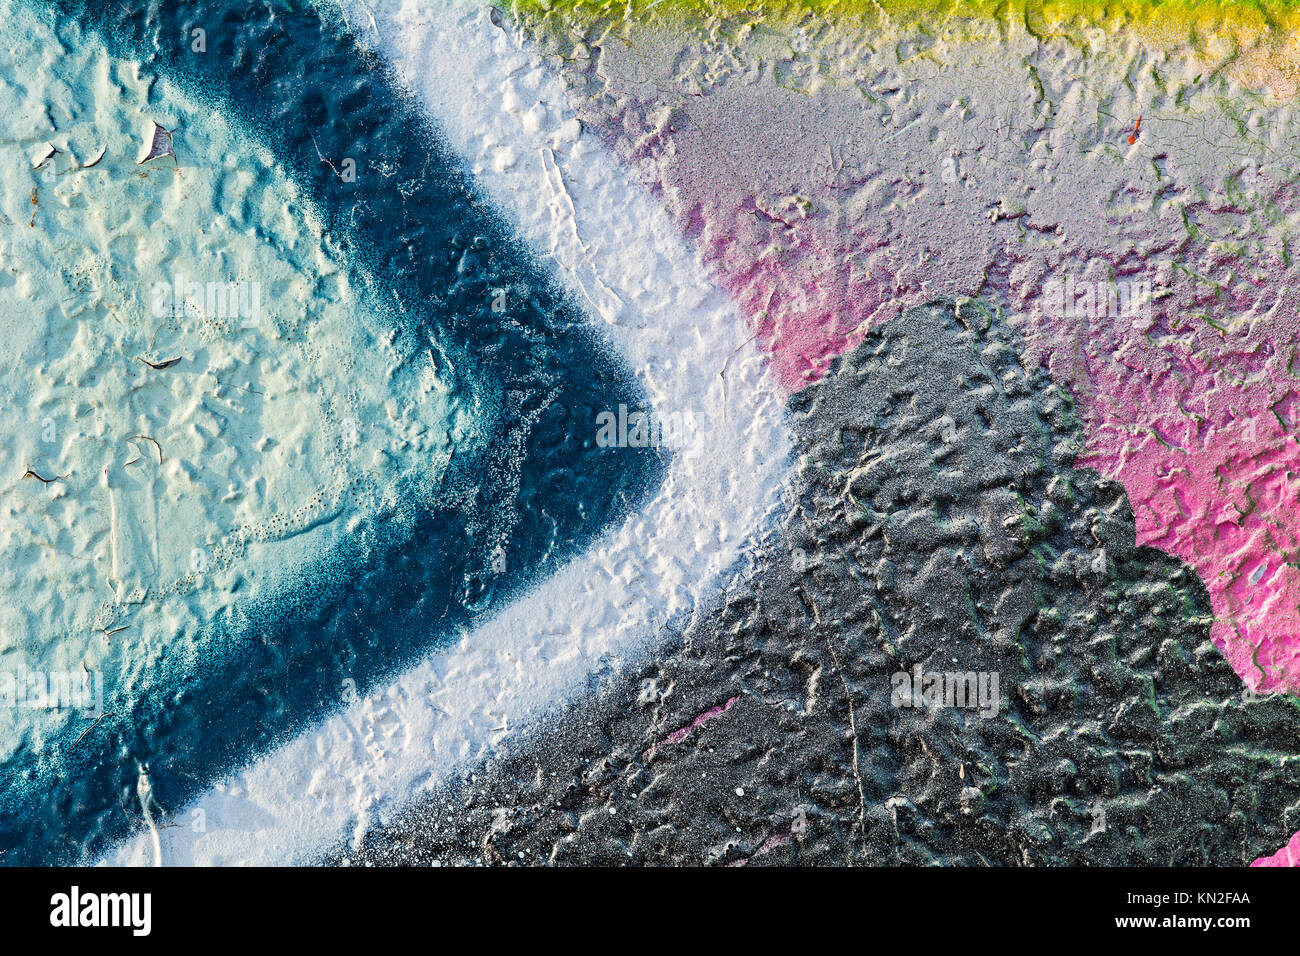 abstract painting on rough concrete surface Stock Photo